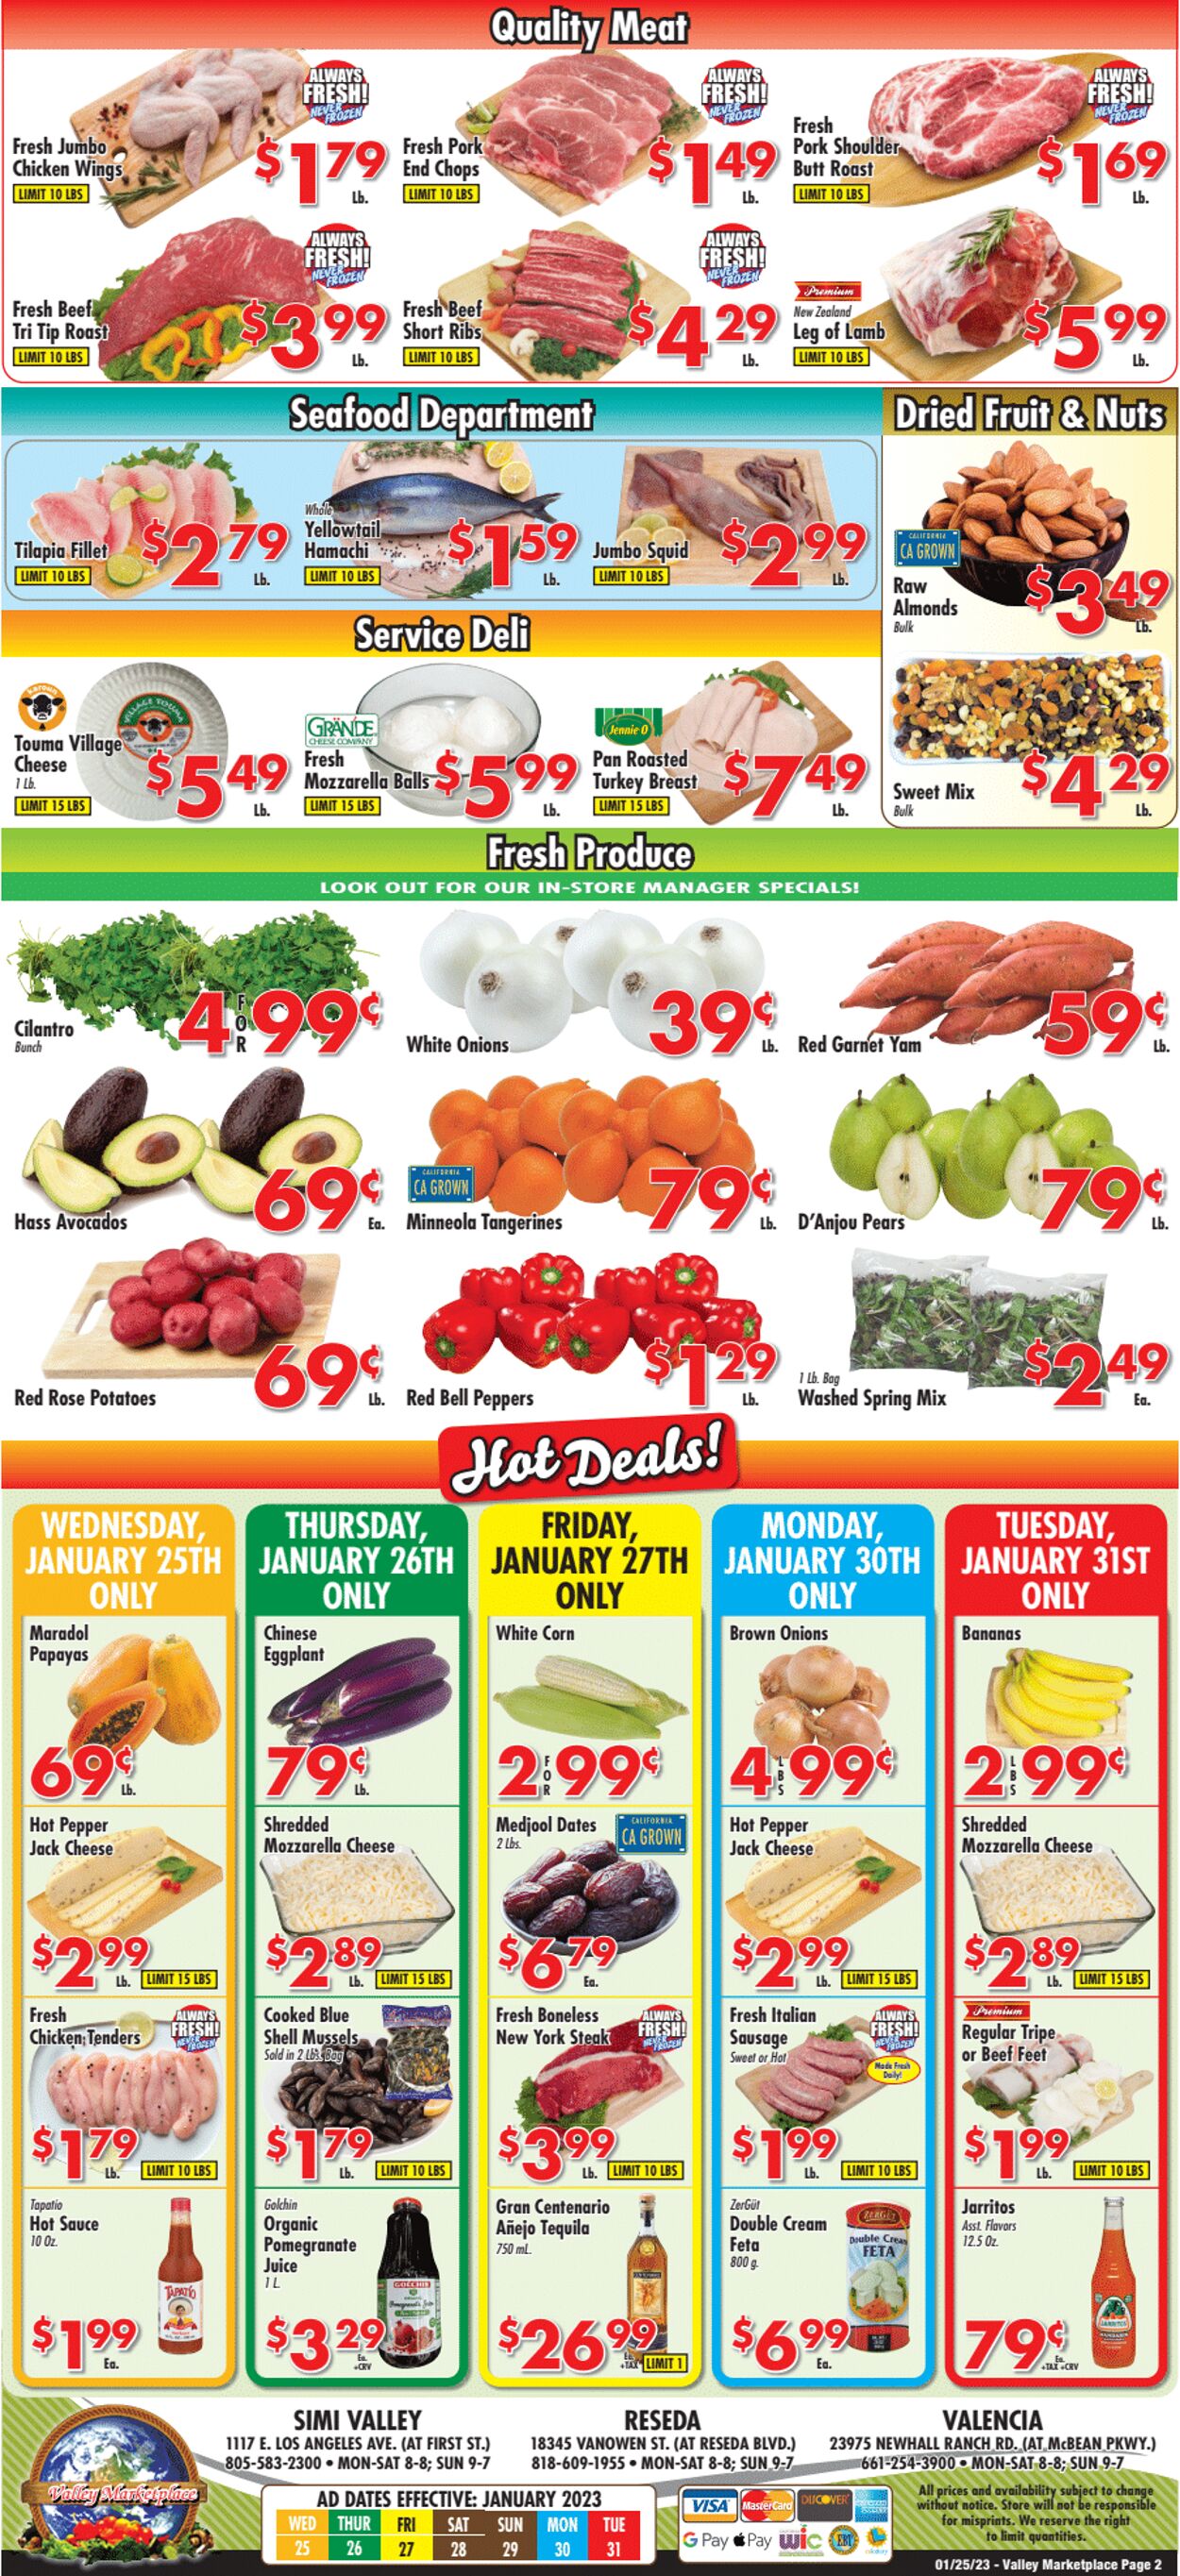 Weekly ad Valley Marketplace 01/25/2023 - 01/31/2023